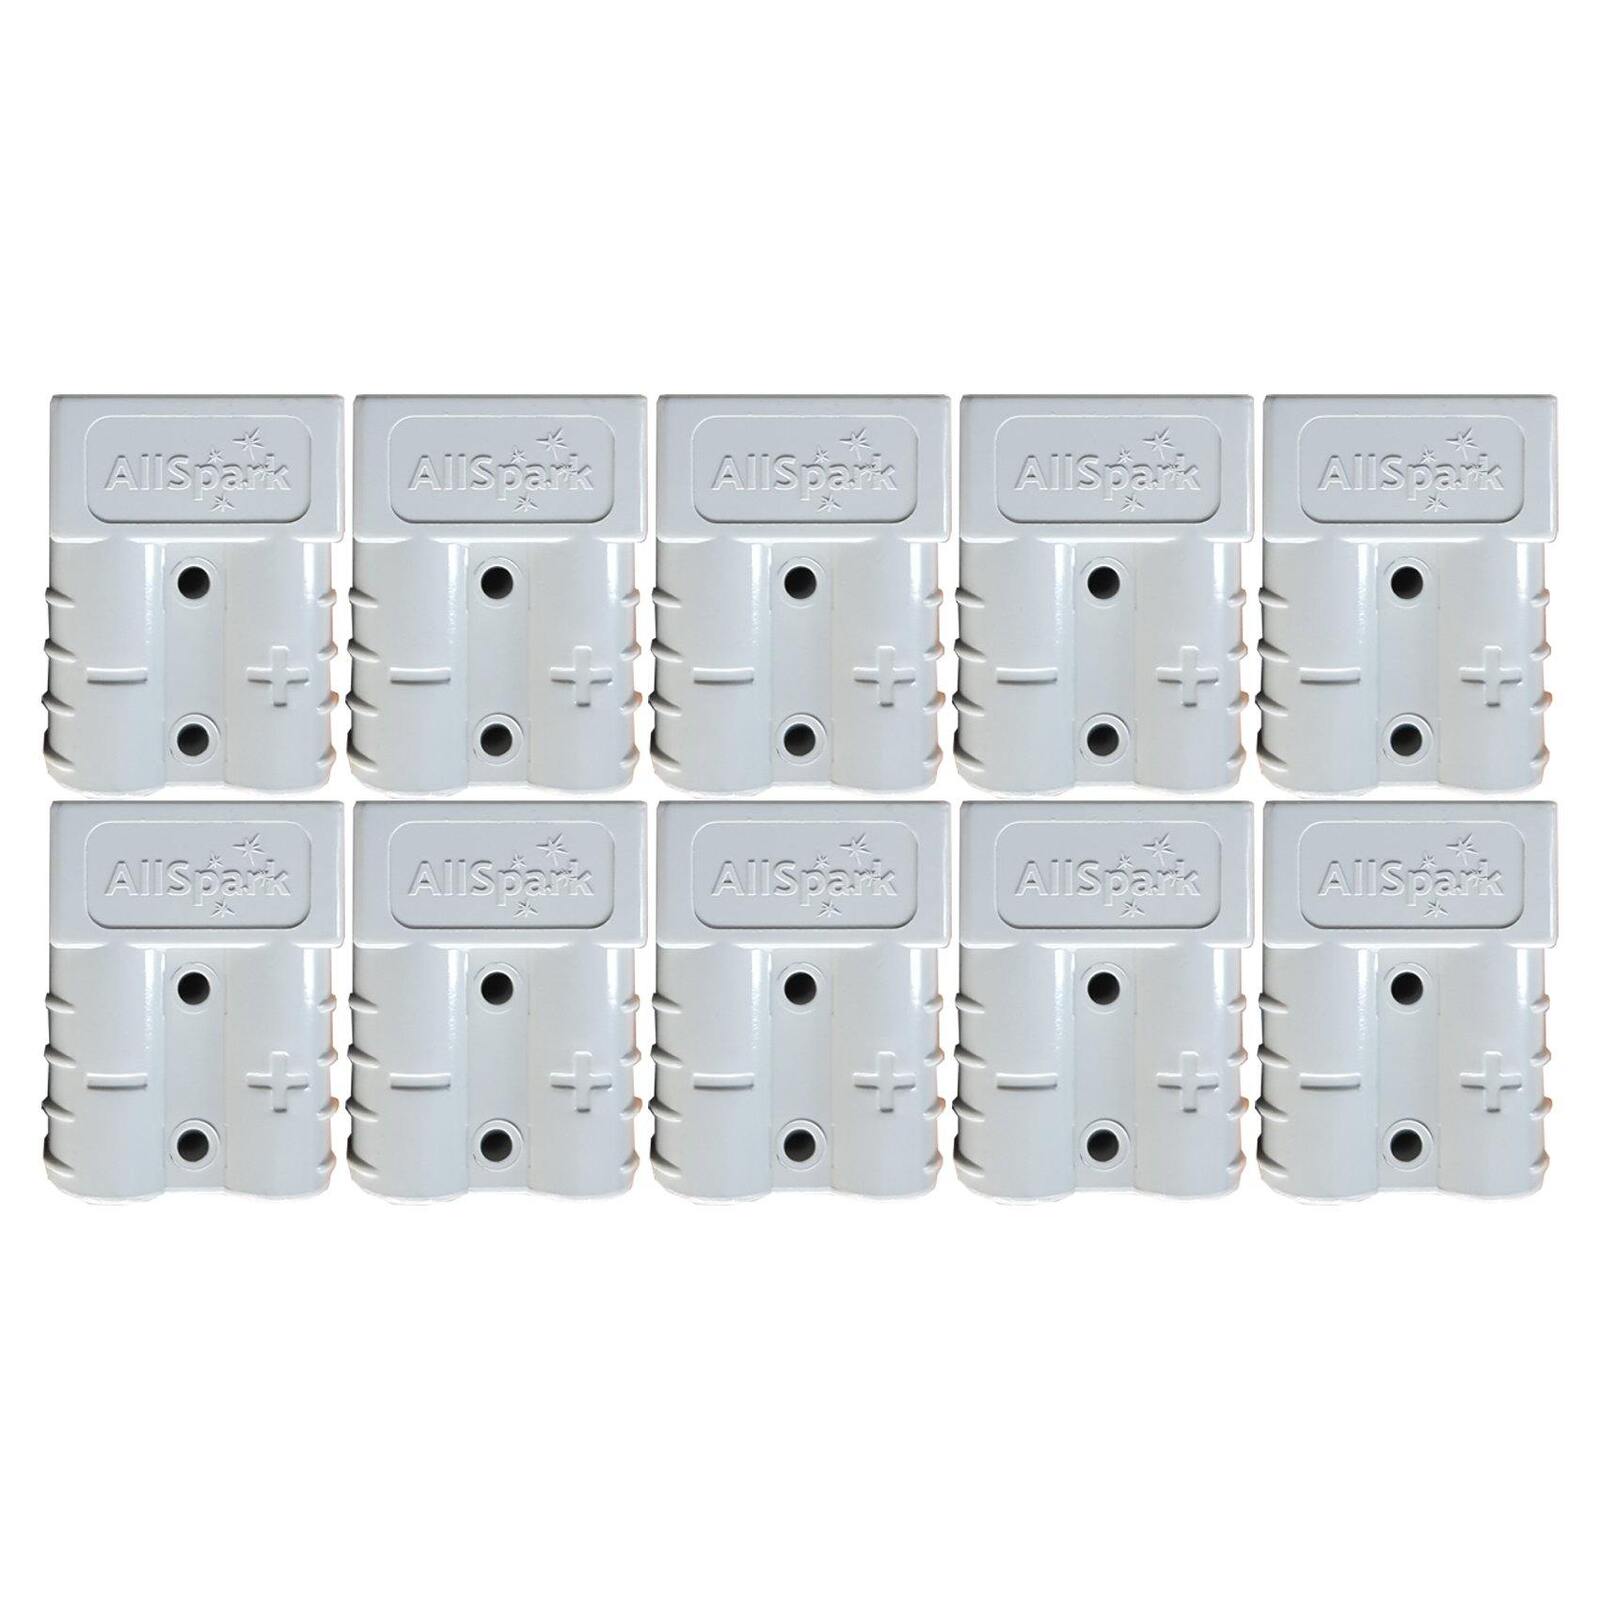 AllSpark 50A Anderson Style Plug Connector Single - 10 pack 10-12 AWG